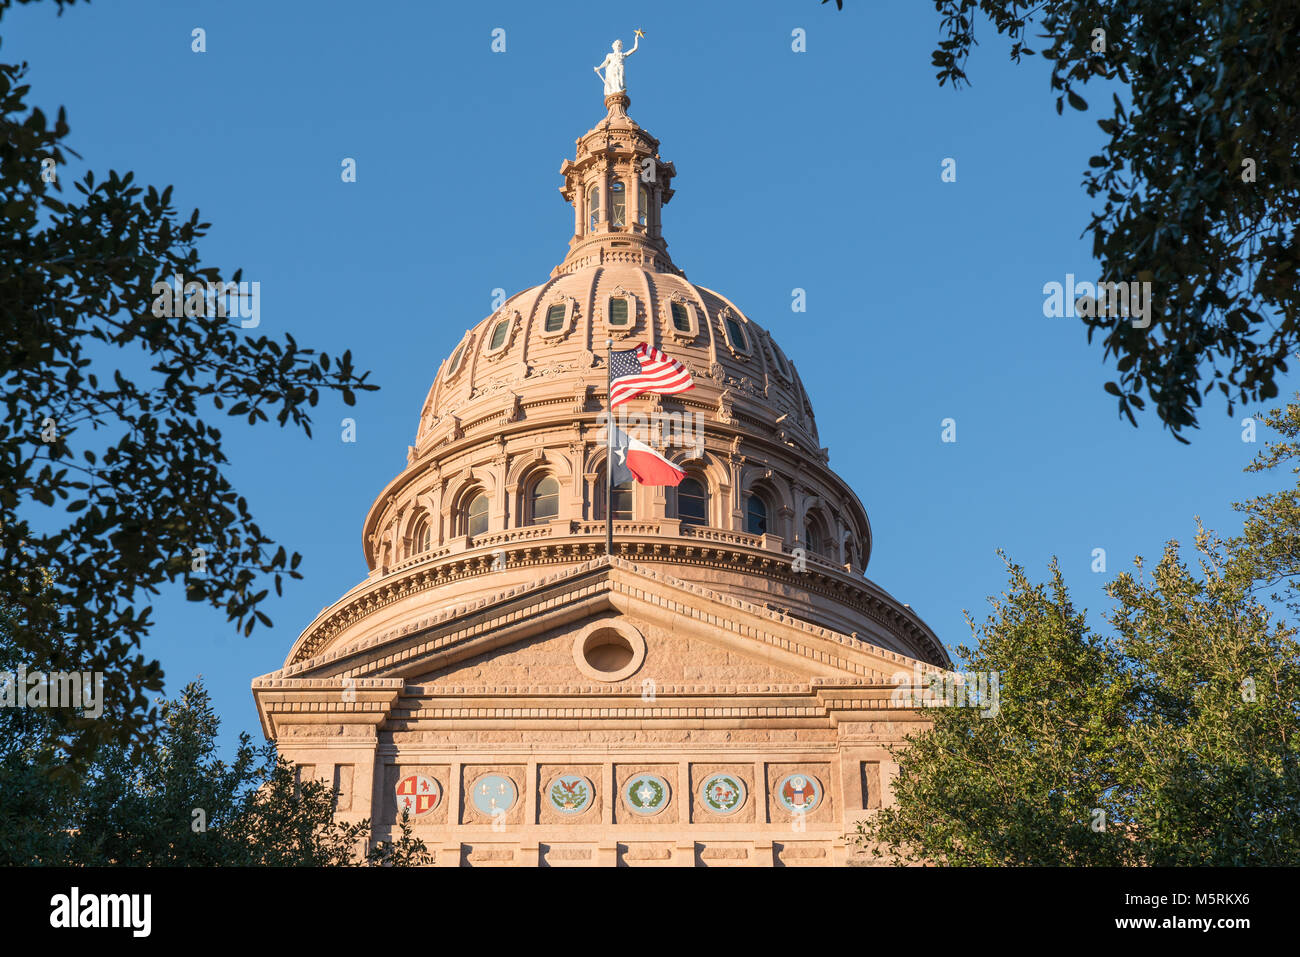 Dome of the Texas capitol building in Austin, Texas Stock Photo